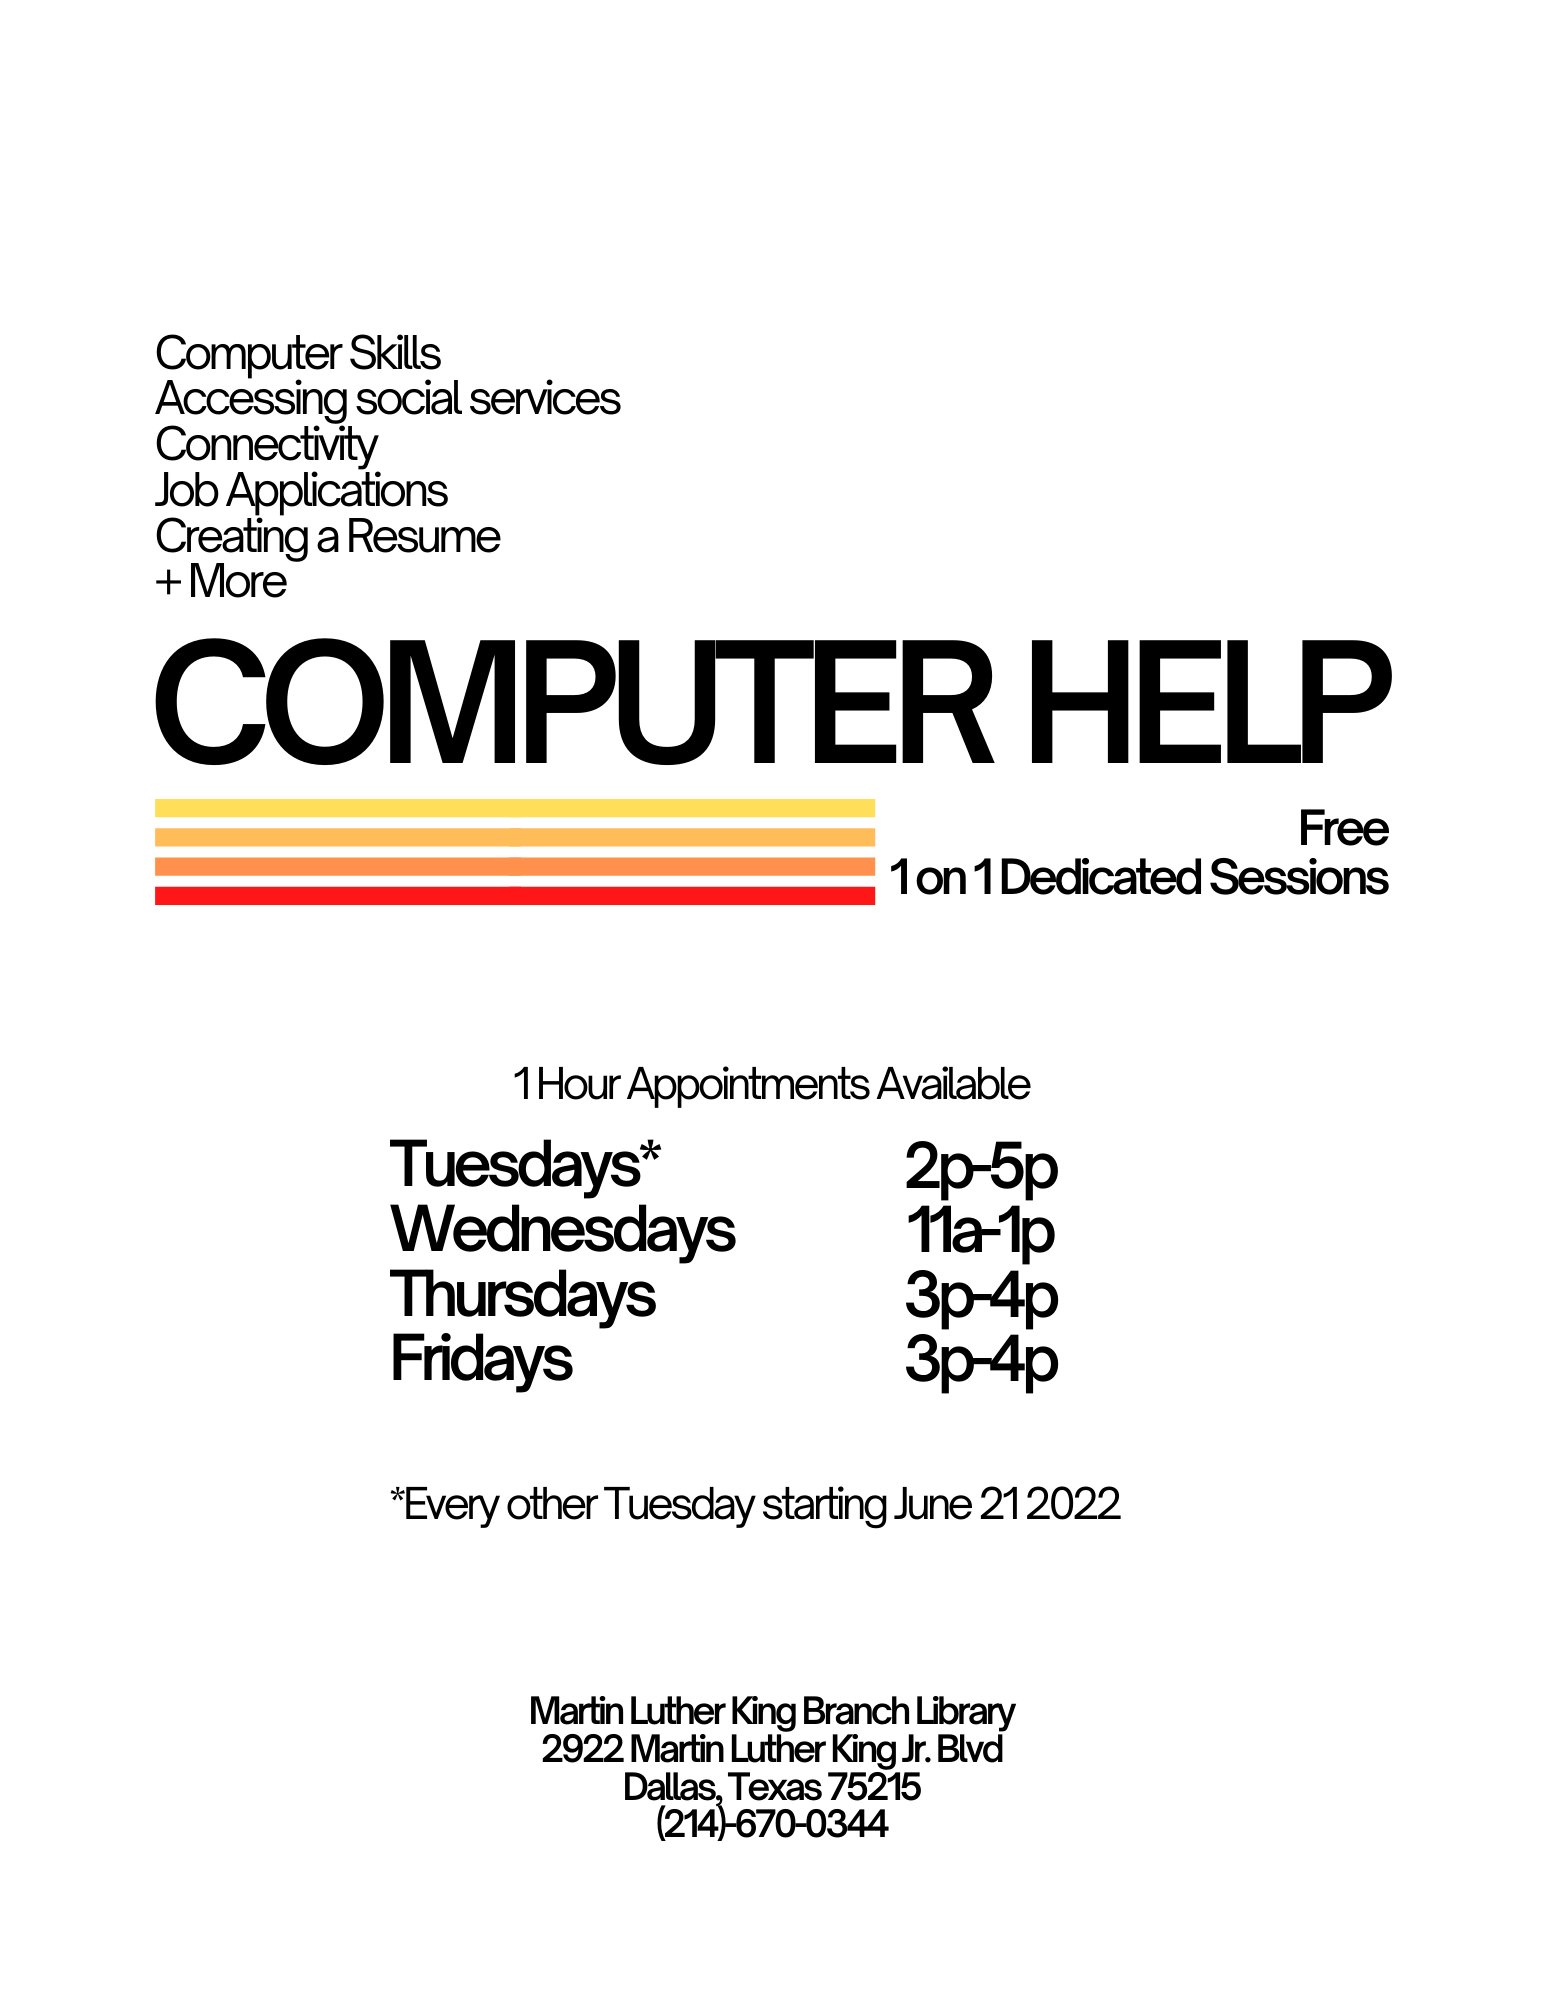 The Martin Luther King Branch Library in Dallas, Texas is introducing free 1 on 1 appointments for computer assistance. Appointments can be made by calling 214 670 0344